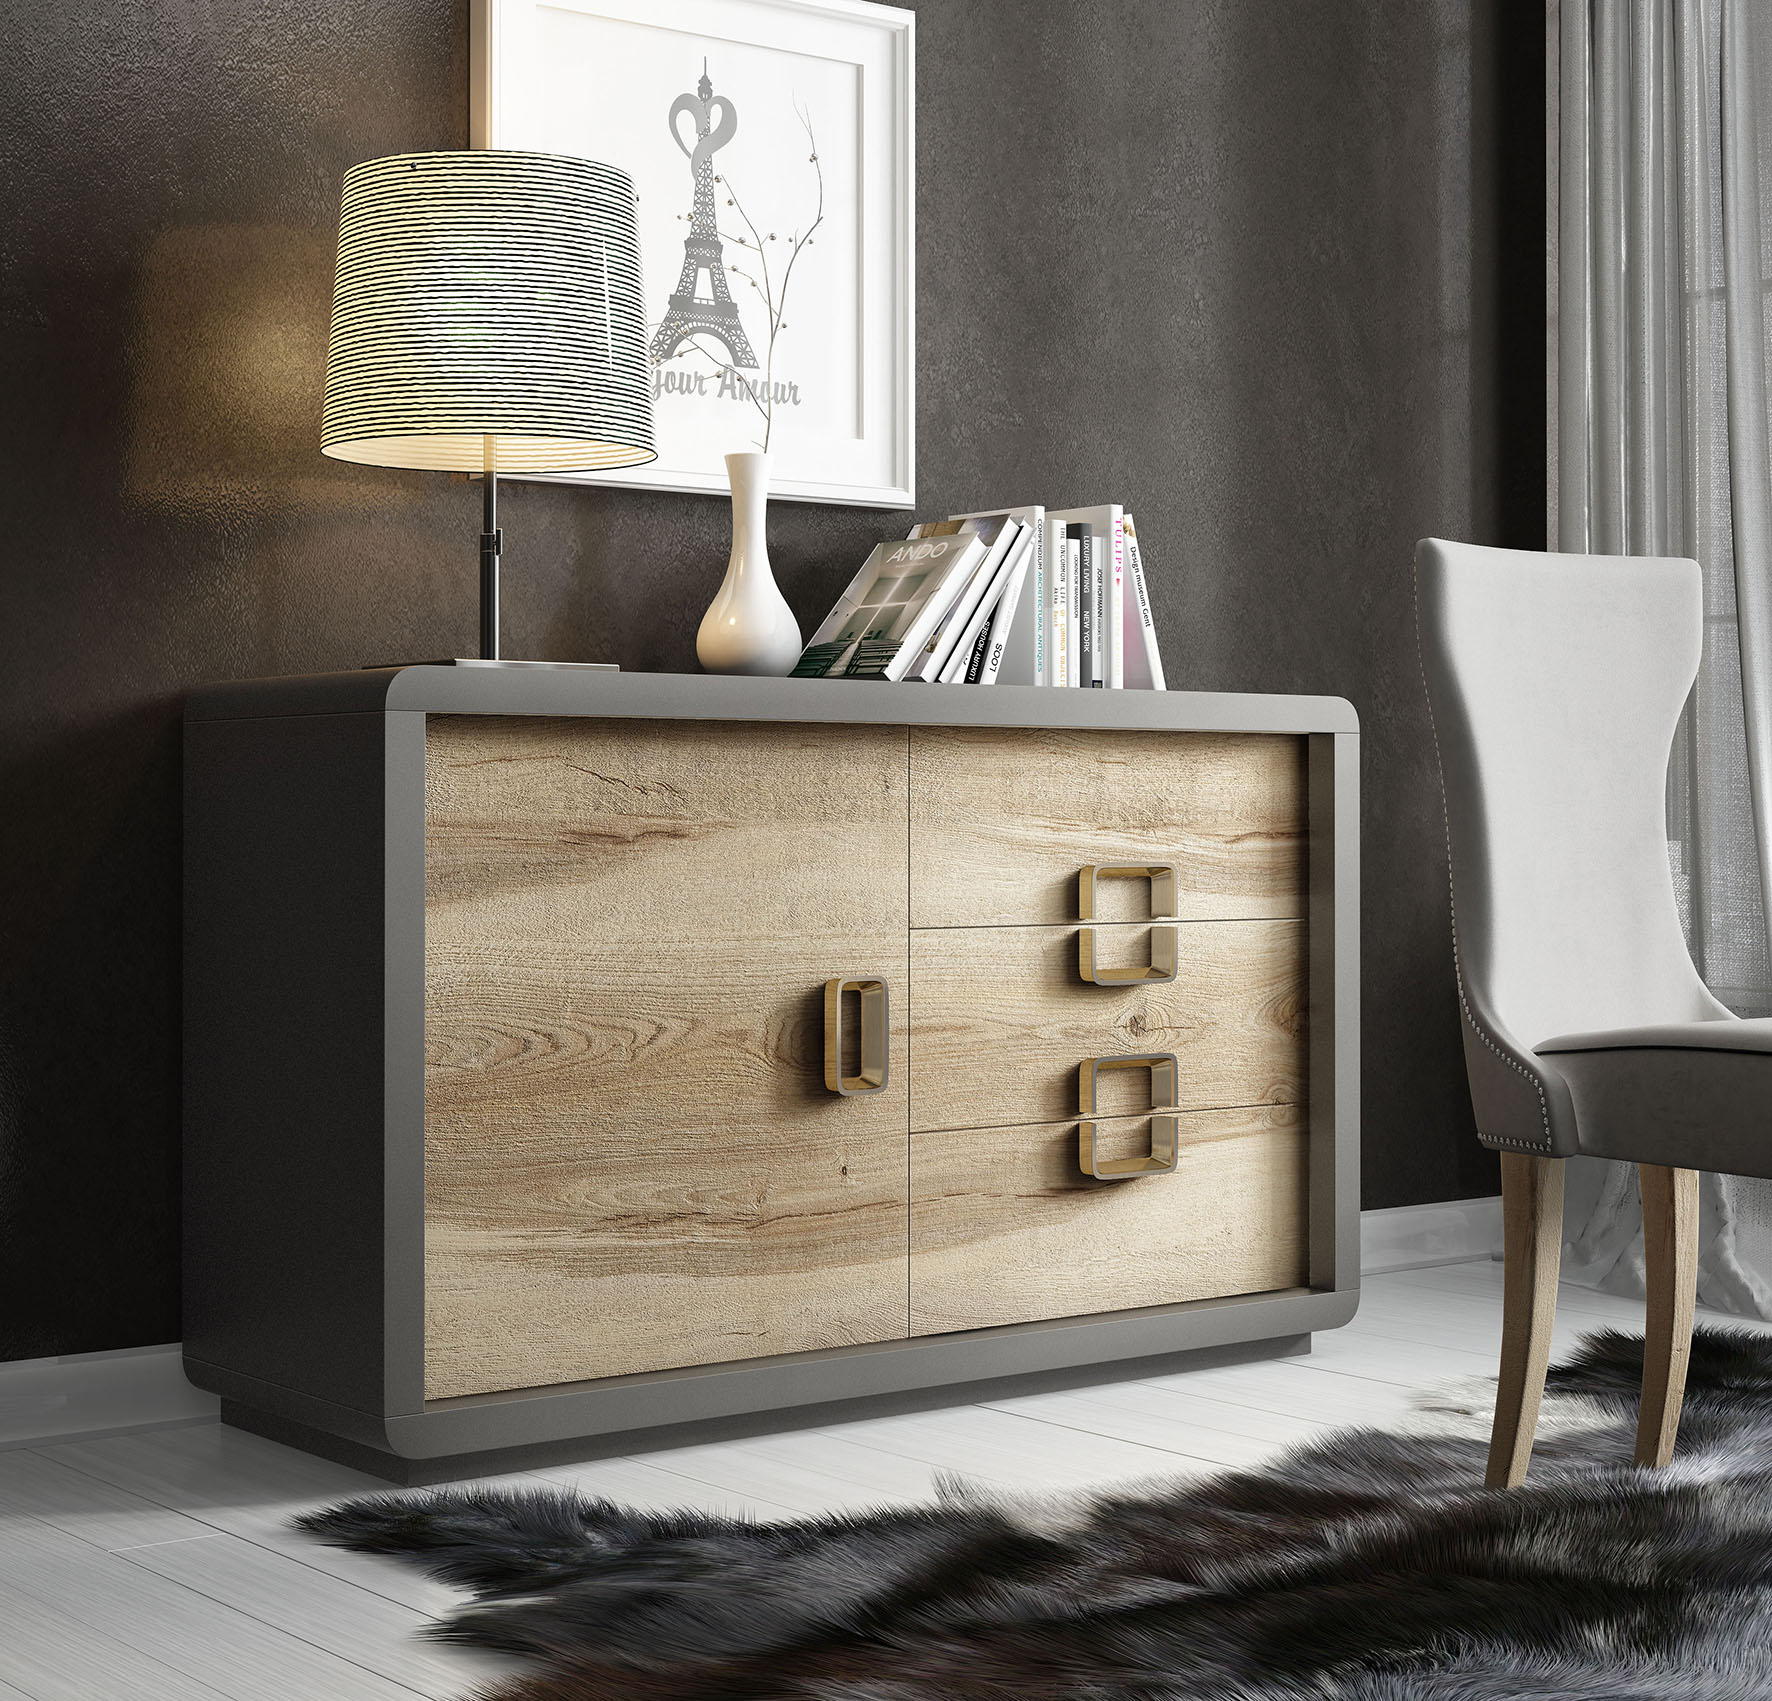 Brands Franco Kora Dining and Wall Units, Spain AII.27 Sideboard